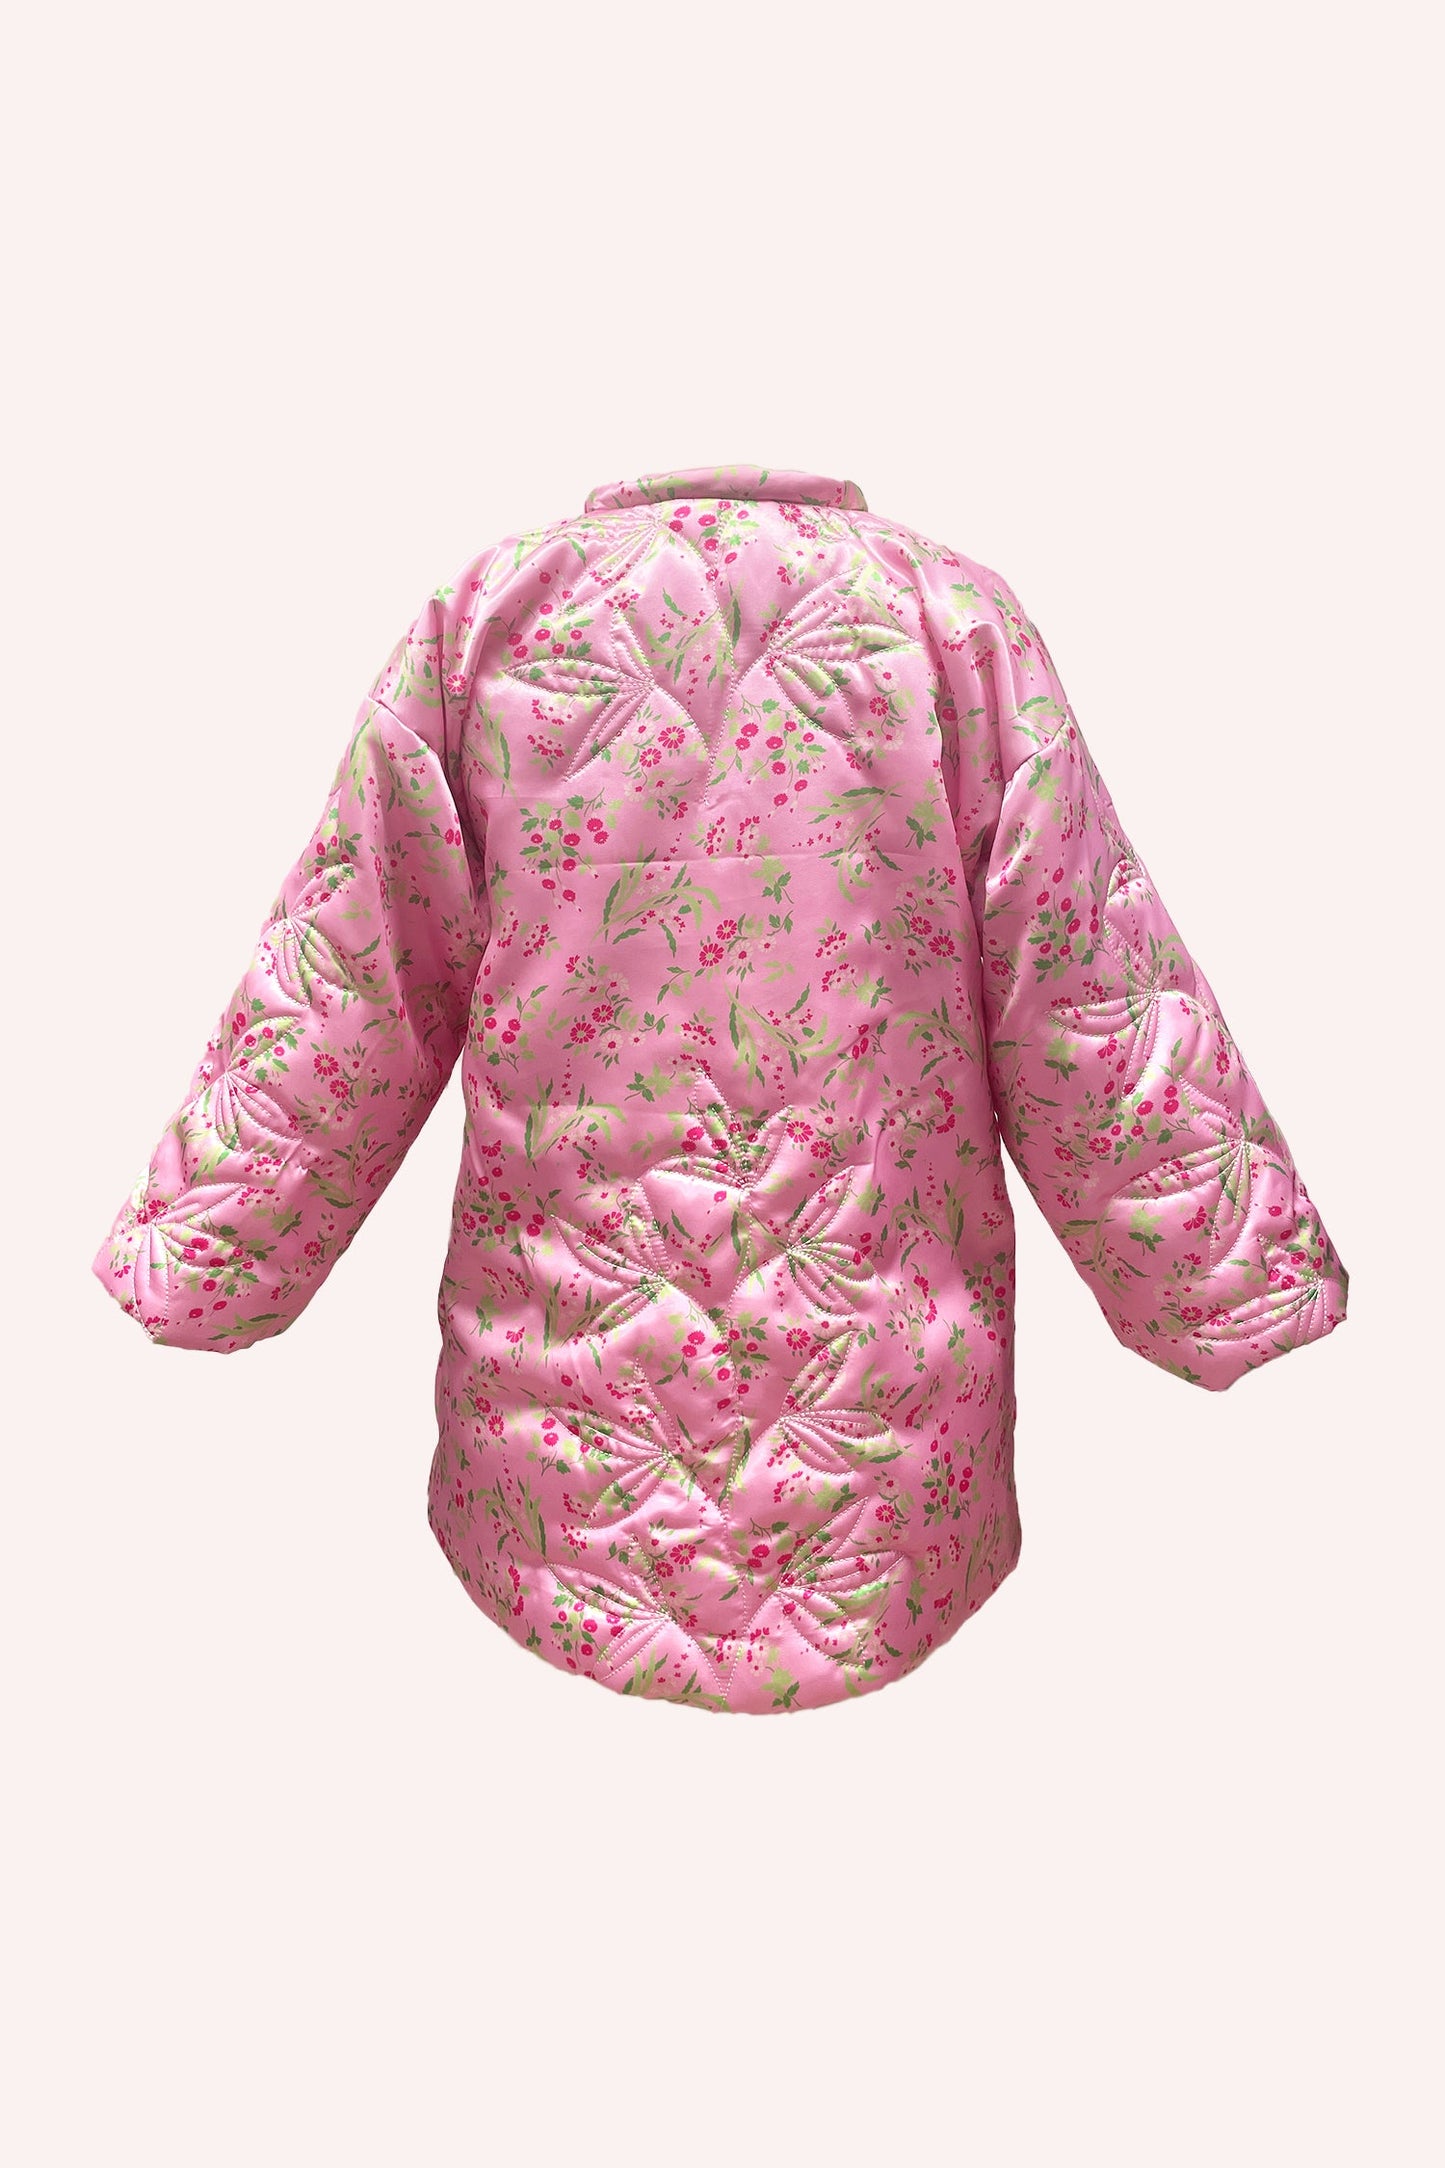 Arcadia Blossom Quilted Satin Boudoir Coat is pink with green floral design